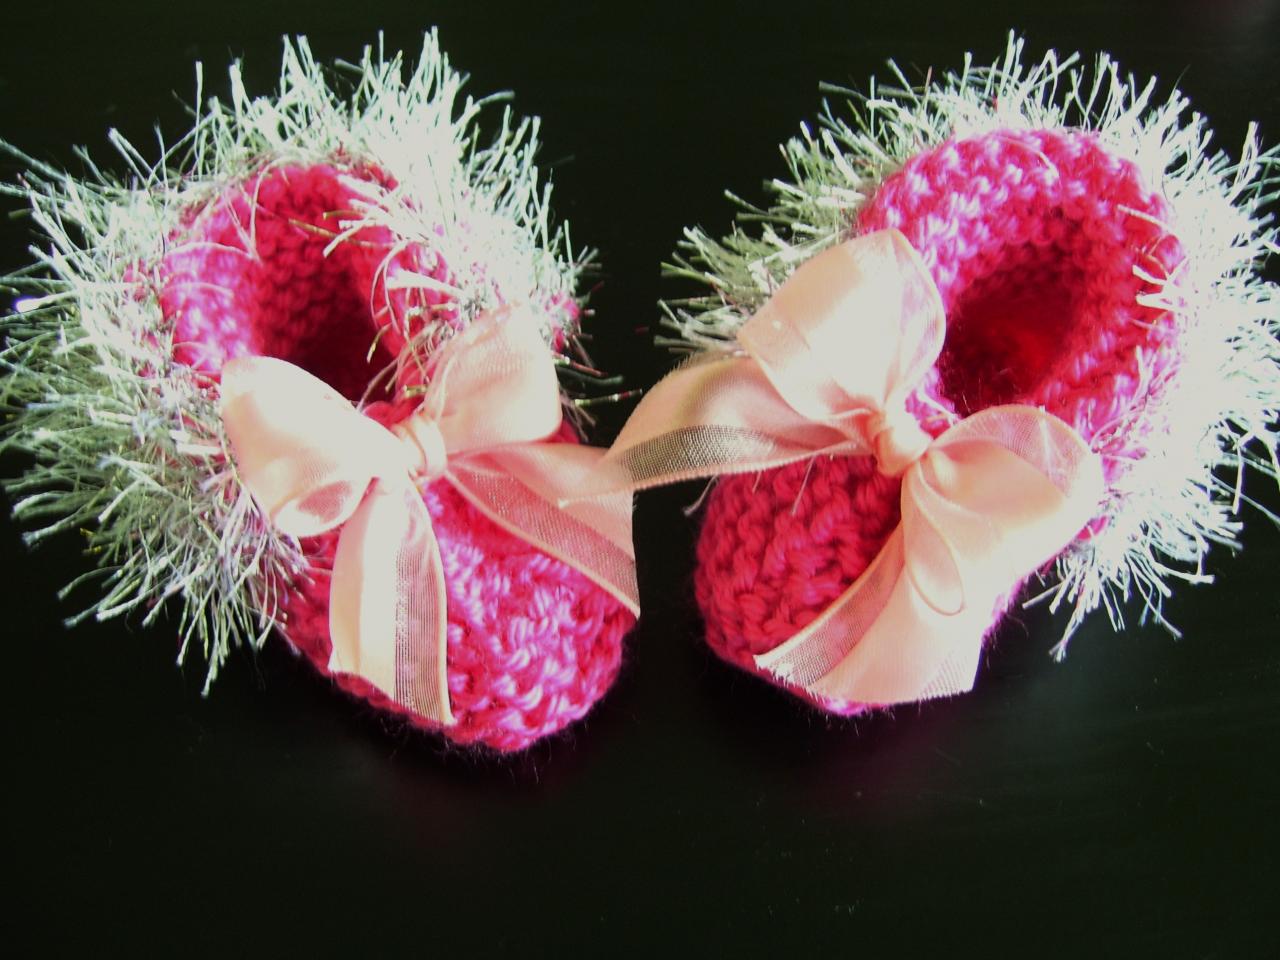 Silver Trimmed Delicate Handmade Bright Pink Baby Booties